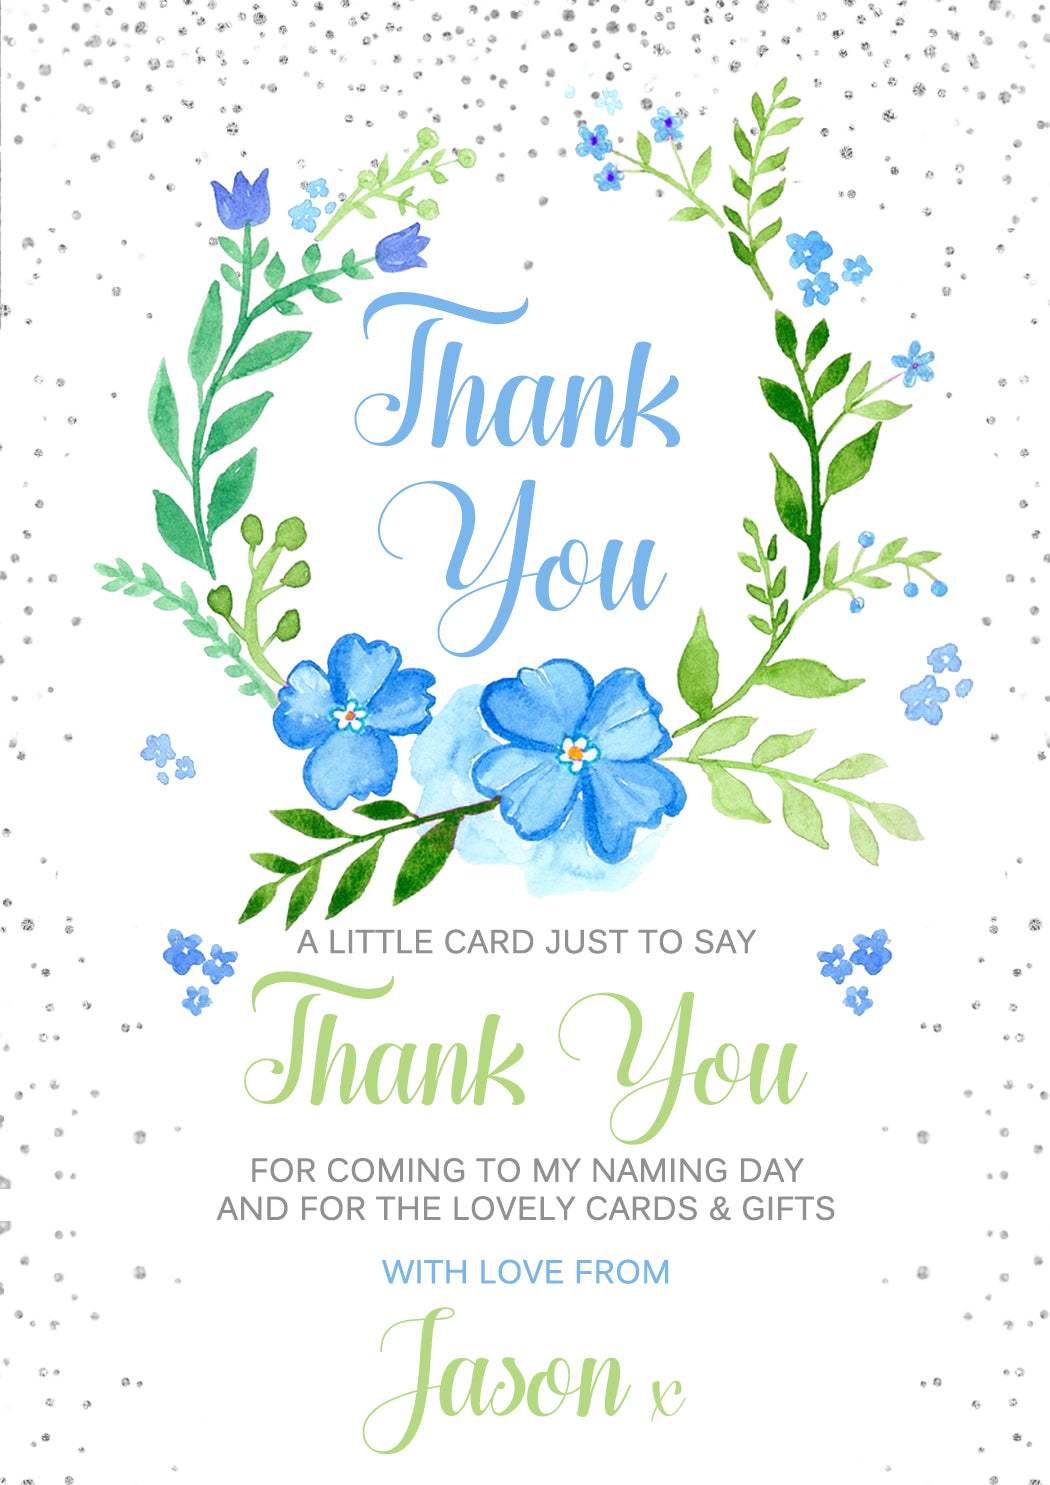 Christening Birthday Easter Thank You Cards Cute Floral Wreath ...